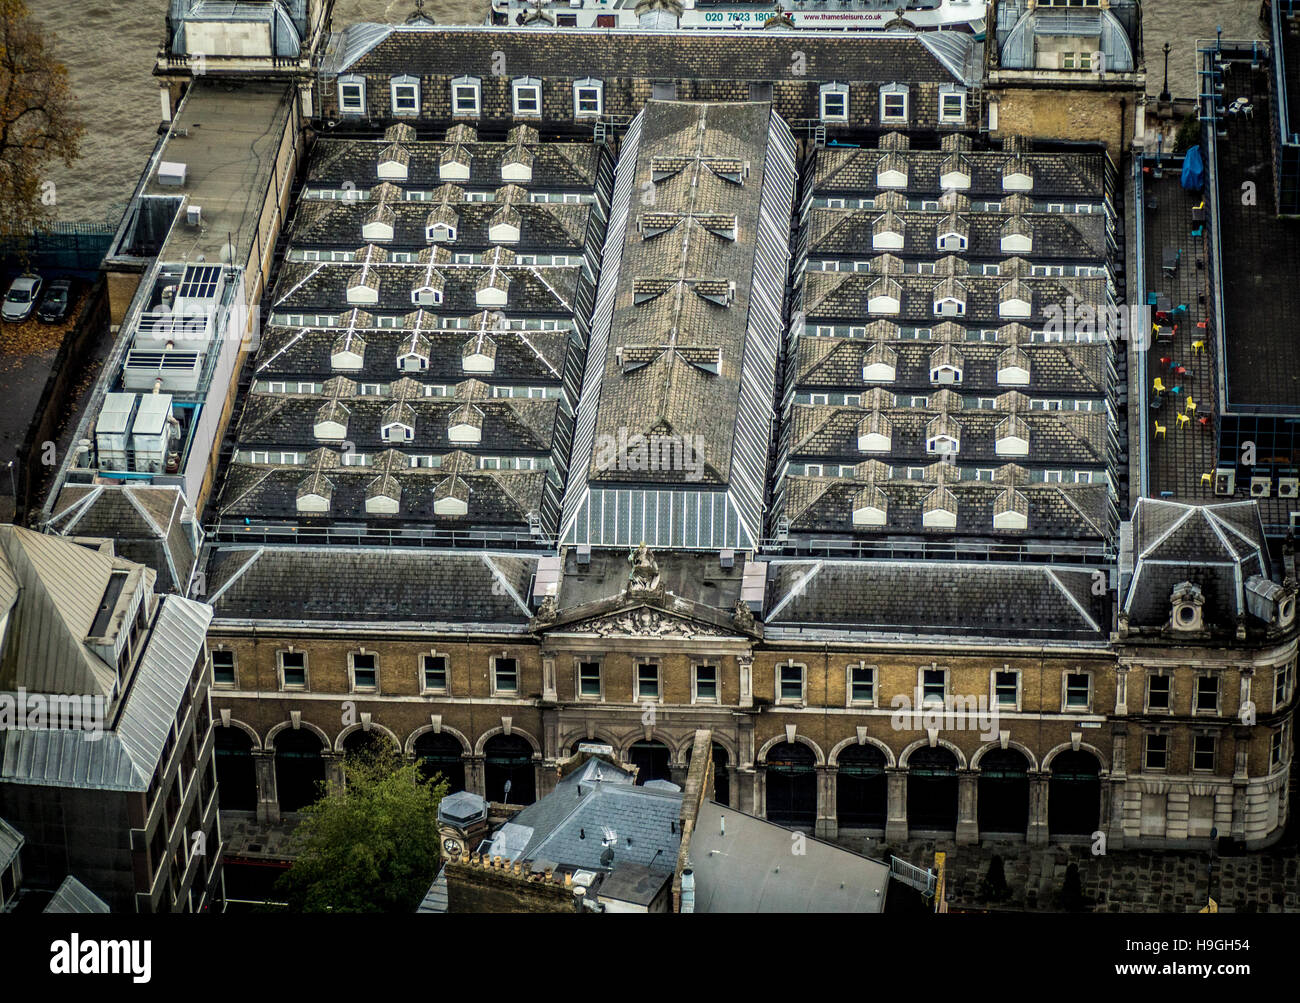 Roof of the Old Billingsgate Building, London, UK. Stock Photo